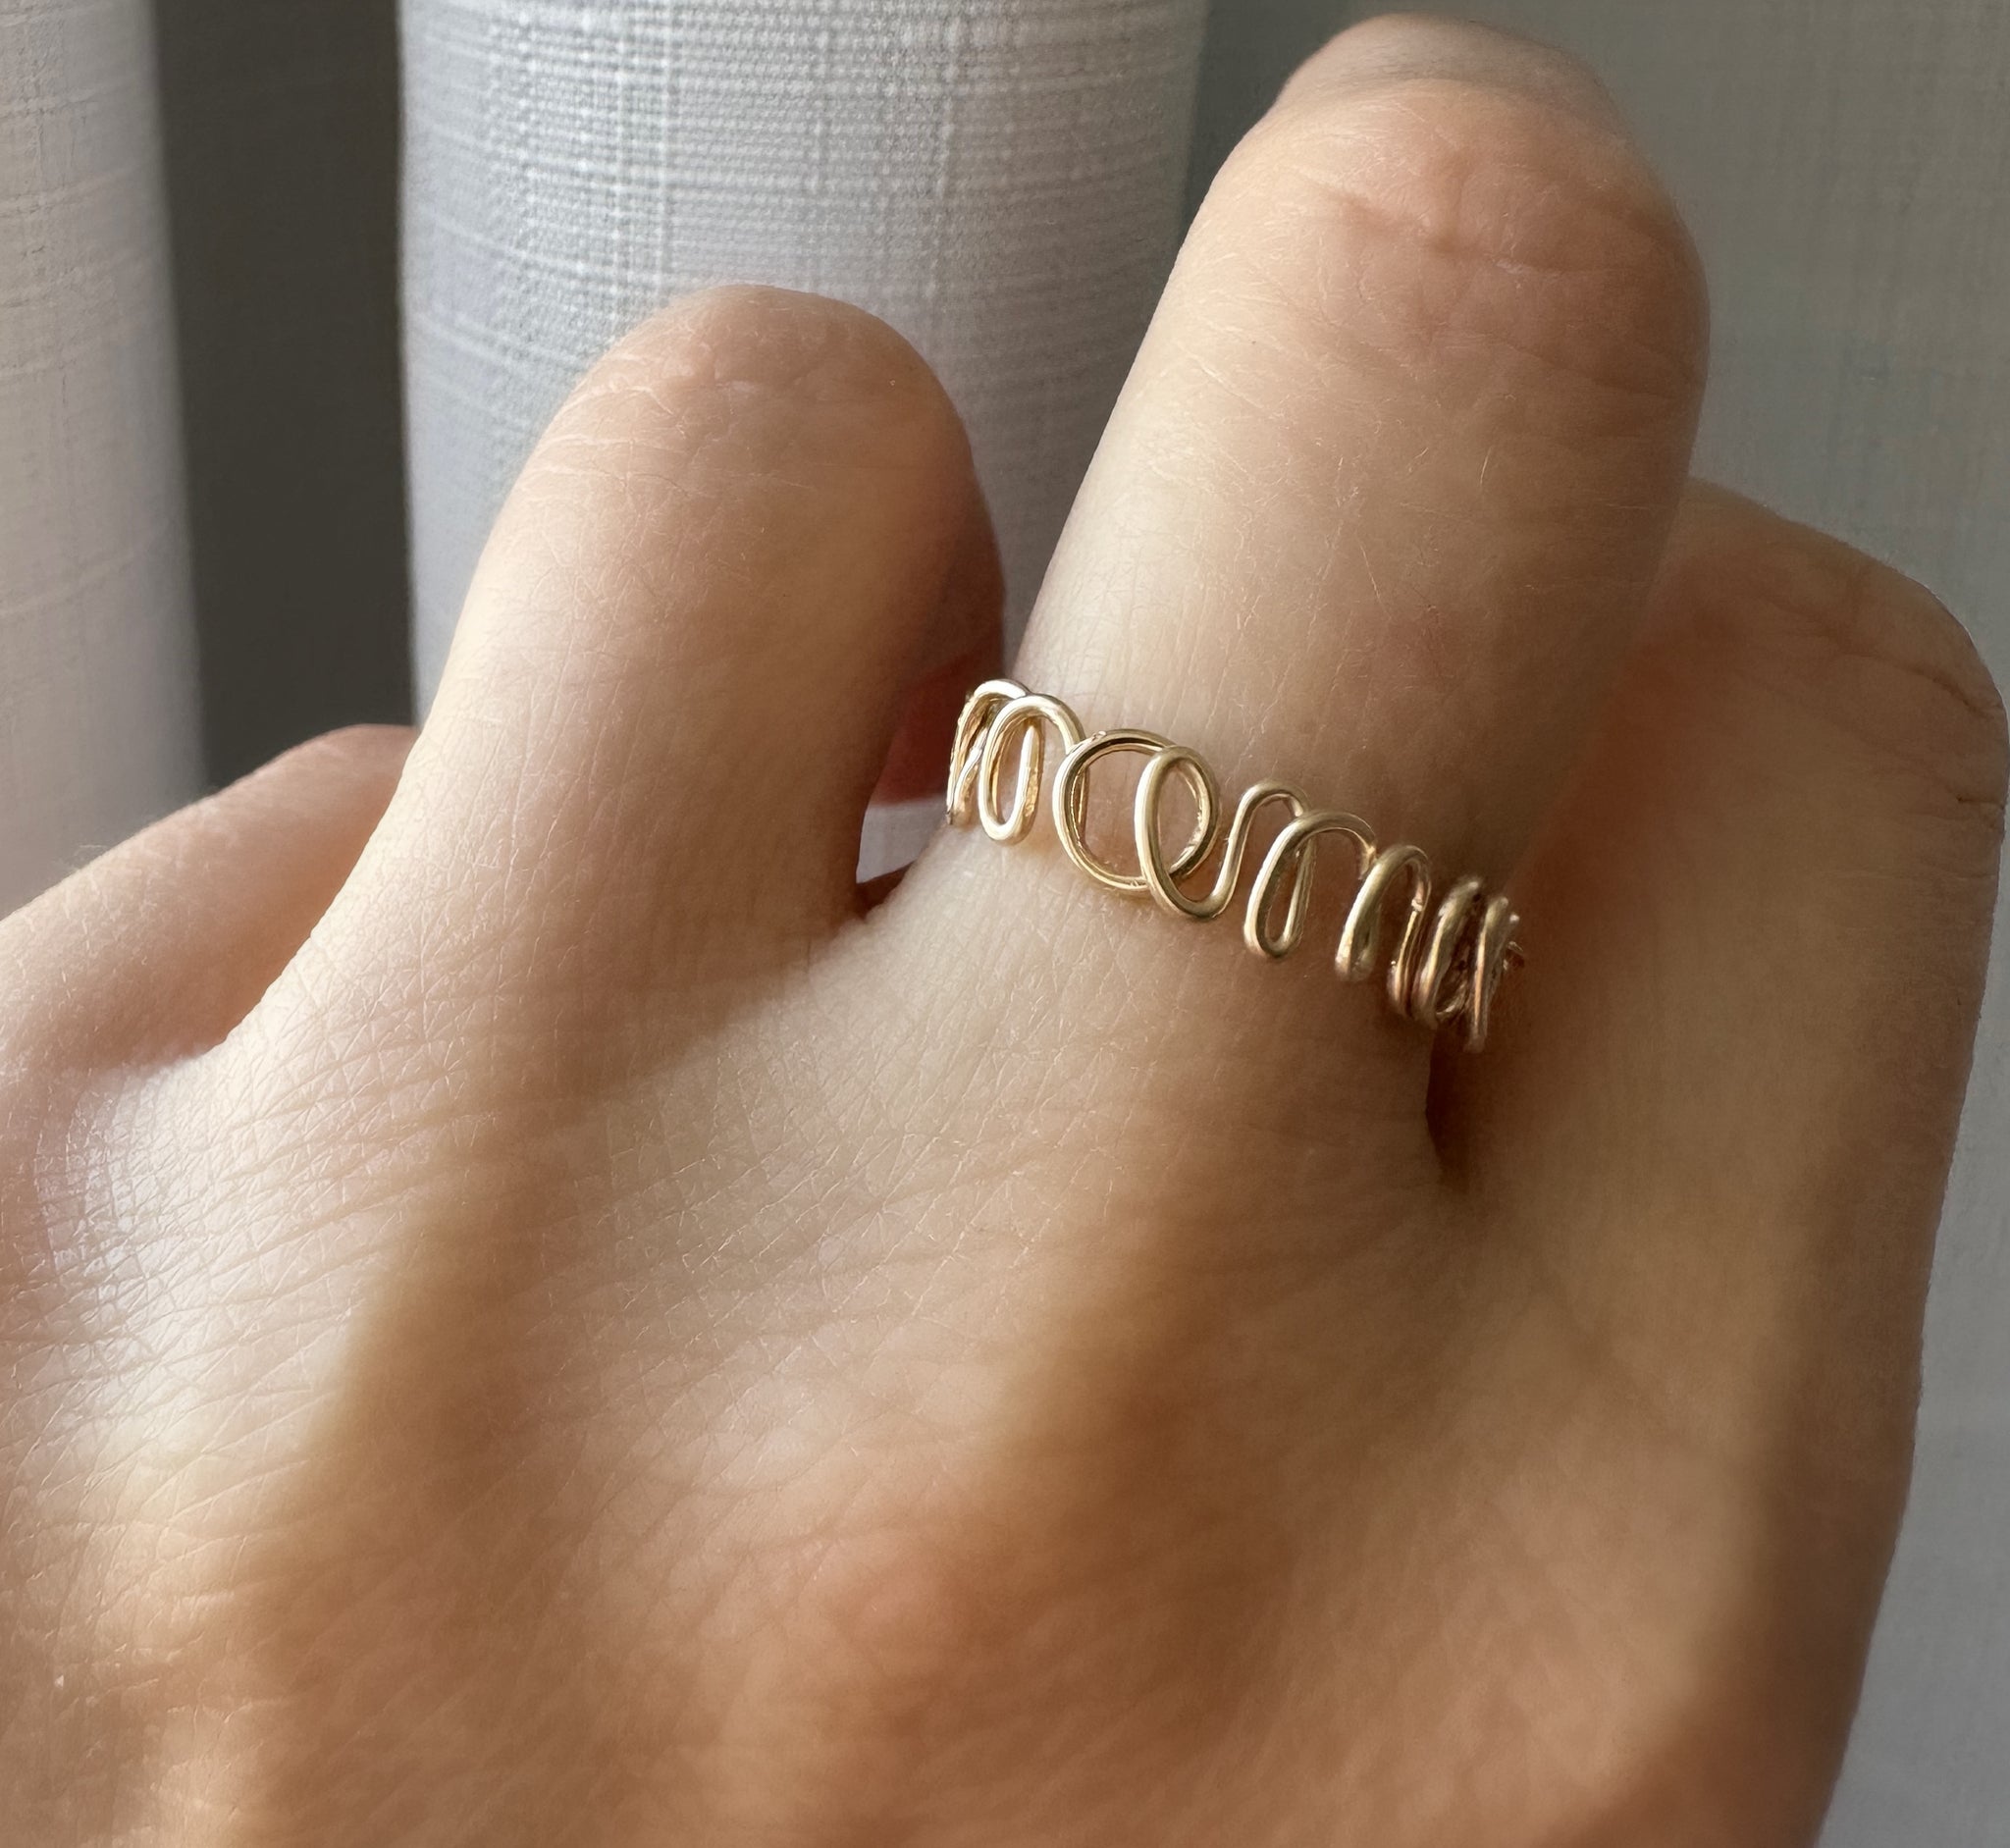 Name Ring With a Star Silver, Personalized Name Ring, Word Name Ring,  Celestial Name Rings, Celestial Name Ring, Name Jewelry, Jewelry. - Etsy